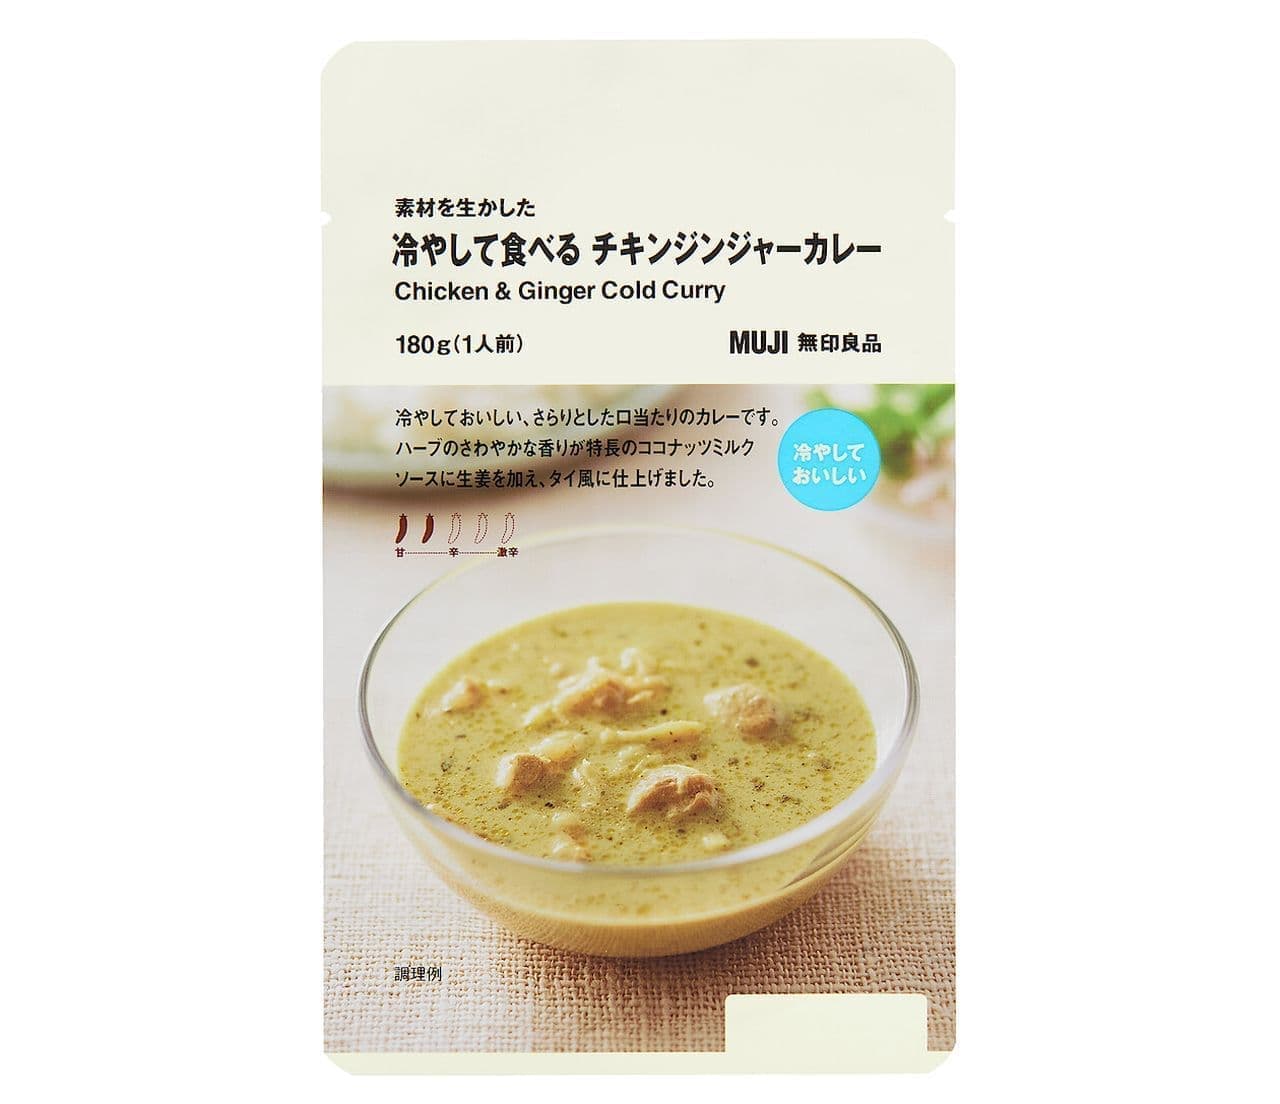 MUJI "Chilled Chicken Ginger Curry with the Best Ingredients".